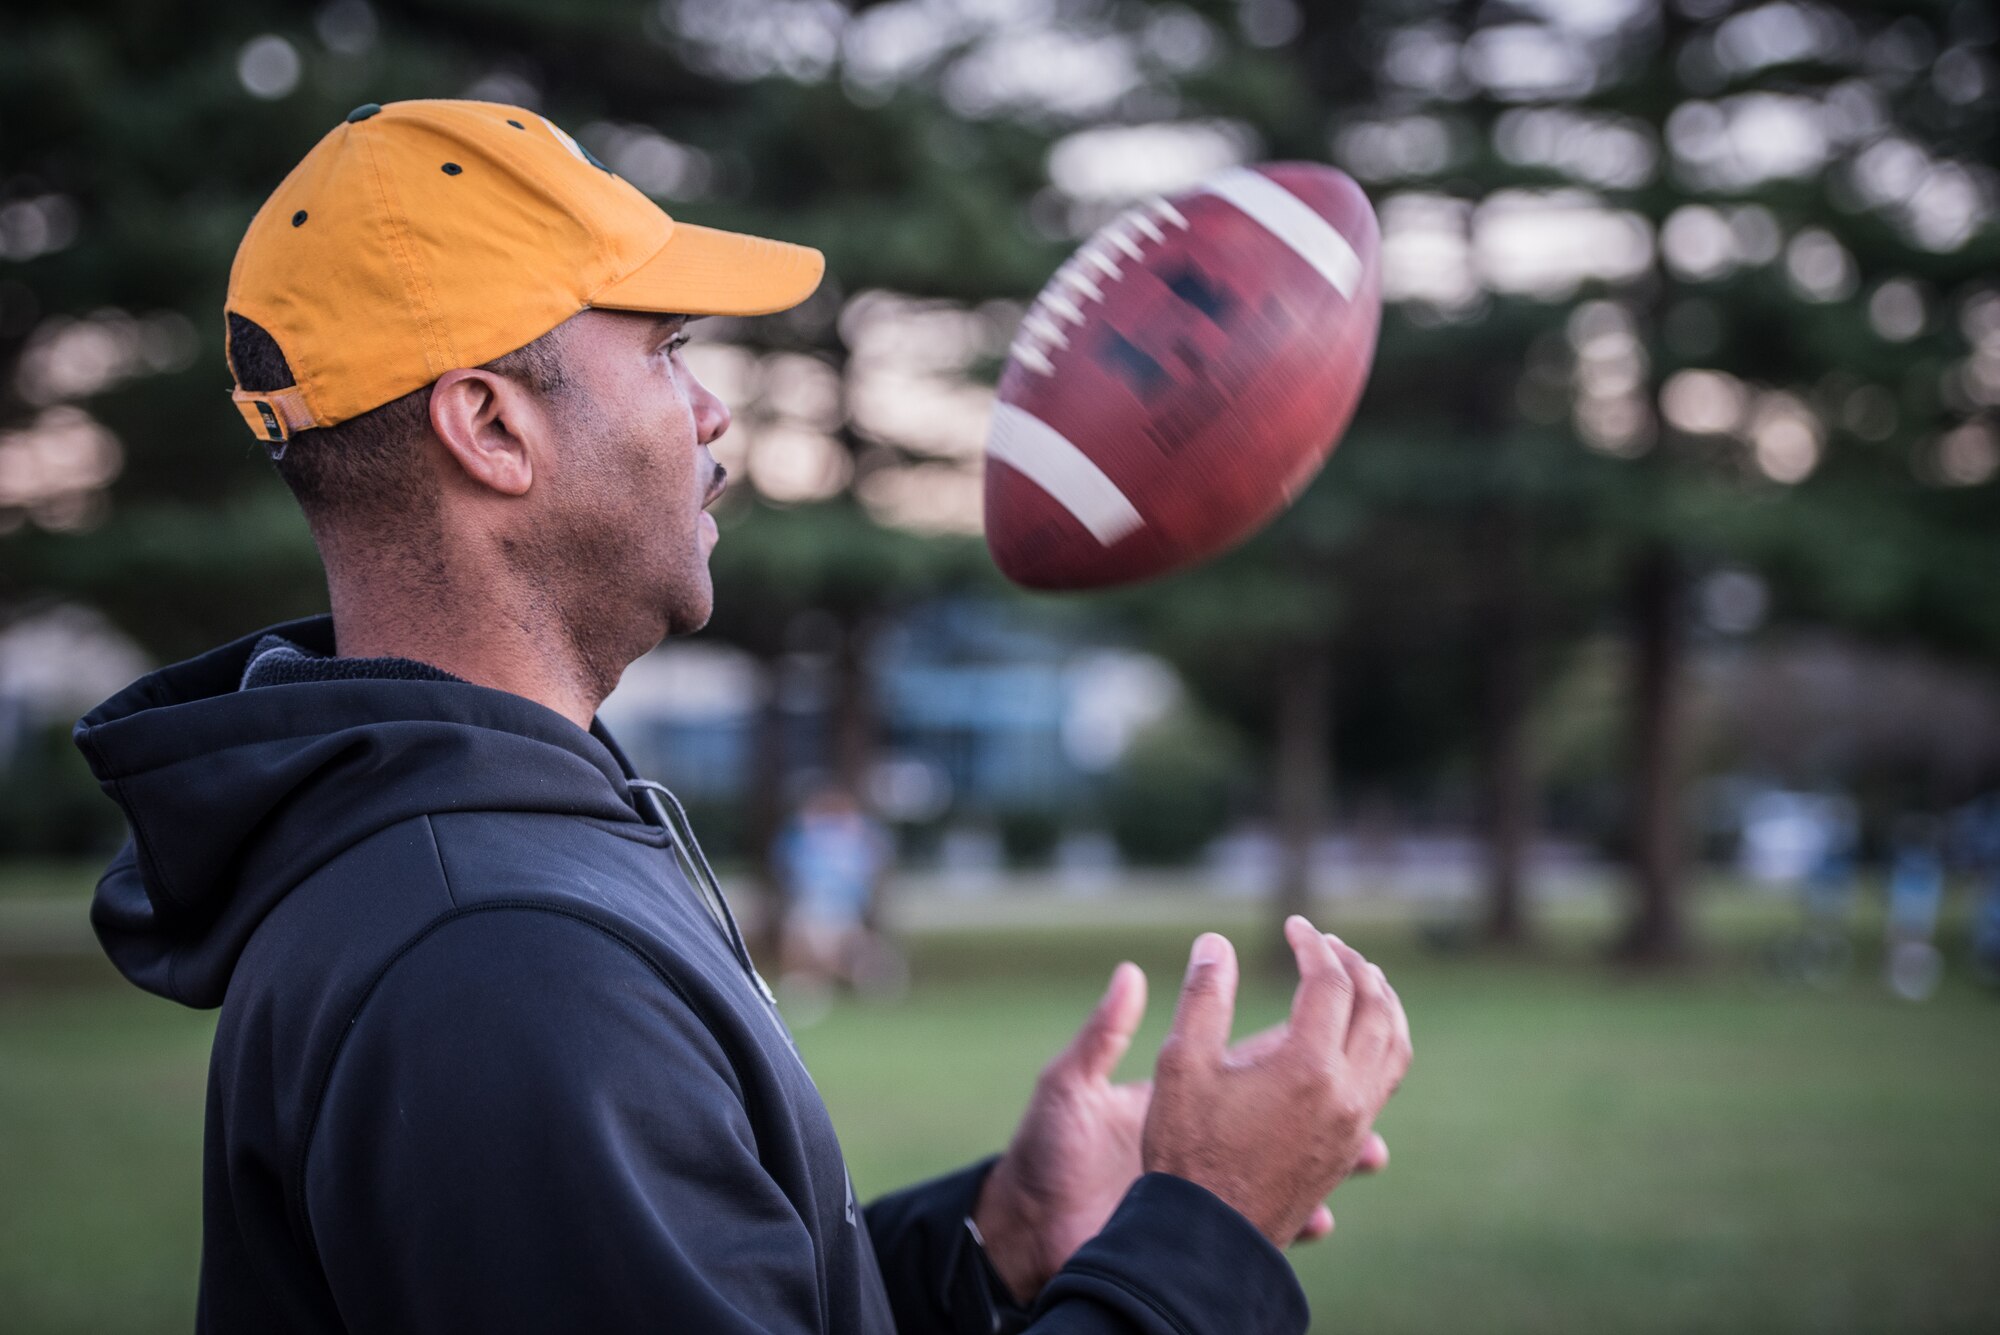 Chief Master Sgt. Anthony Harris, 512 Airlift Wing Force Support Squadron superintendent, tosses a football in Dover, Delaware, Oct. 18, 2018. Harris coaches The Pop Warner Dover Caesar Rodney Raiders peewee league team. (U.S. Air Force photo by Staff Sgt. Damien Taylor)